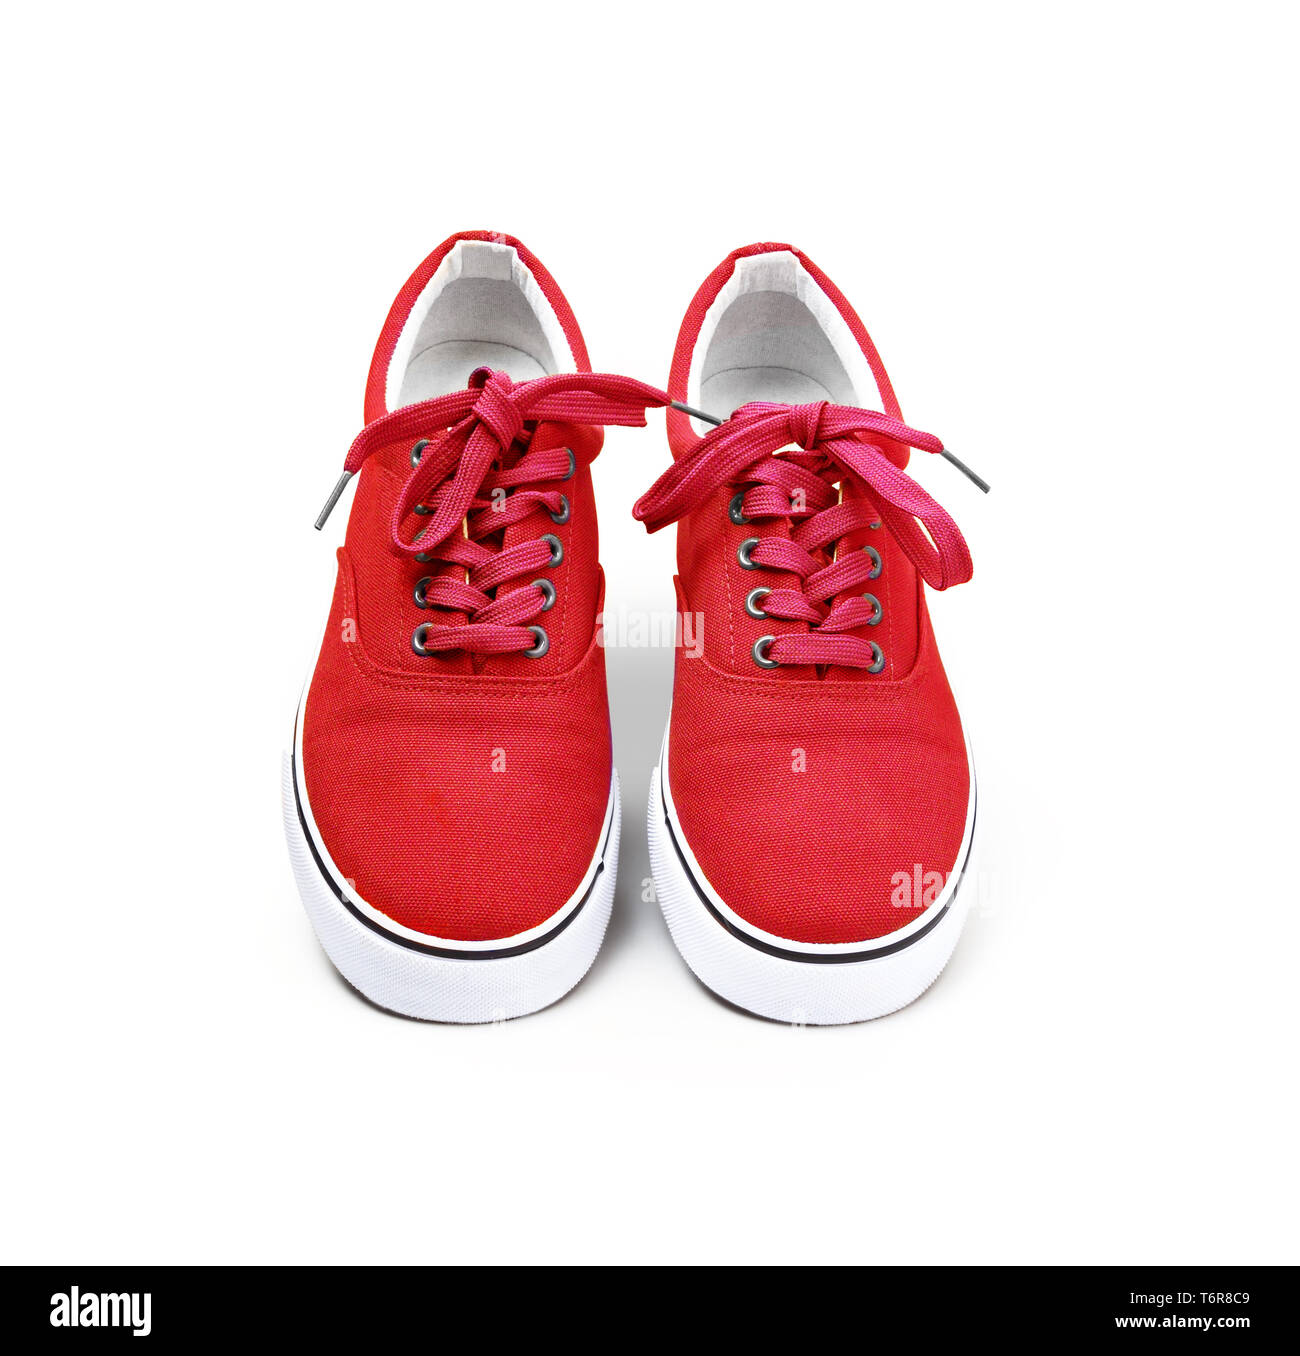 red and white canvas shoes